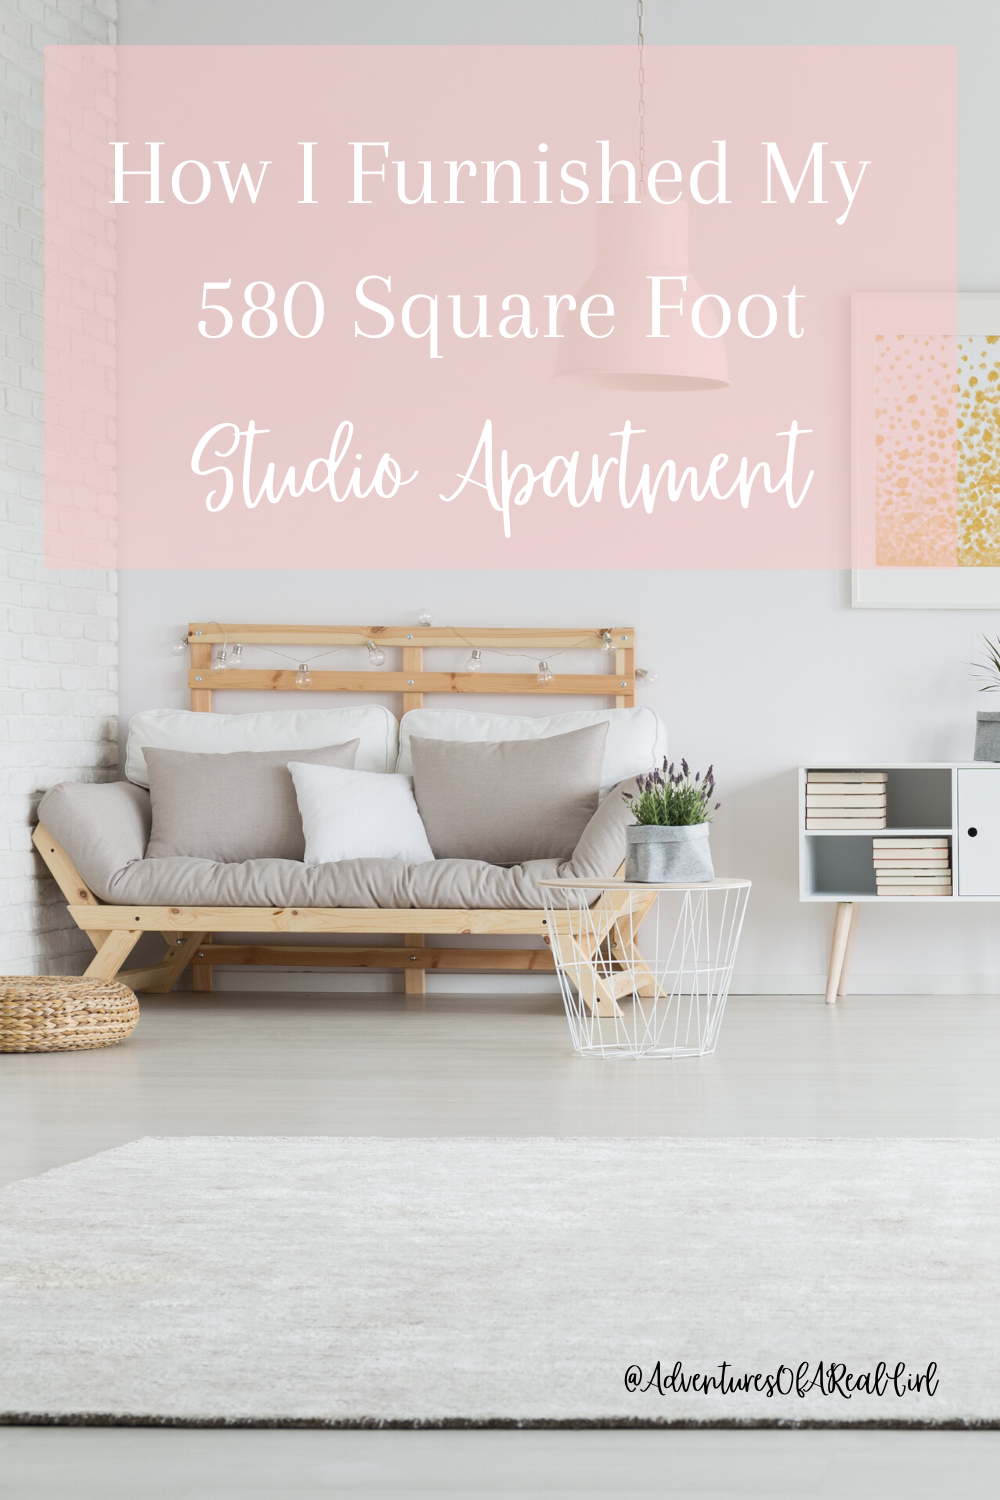 Living in a studio apartment or tiny space? Read all about how I furnished my 580sf studio apartment here!